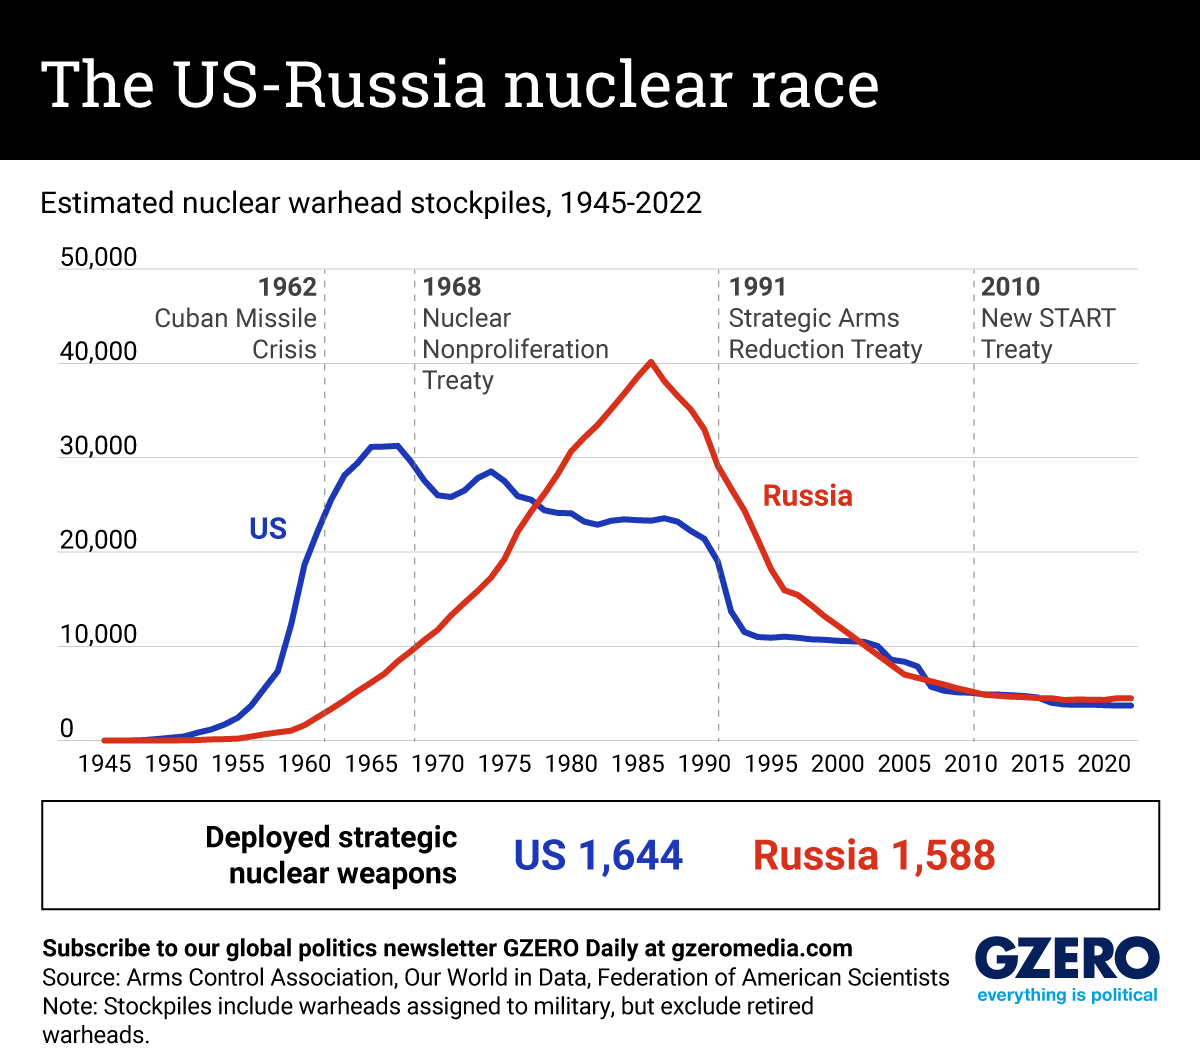 The Graphic Truth: The US-Russia nuclear race